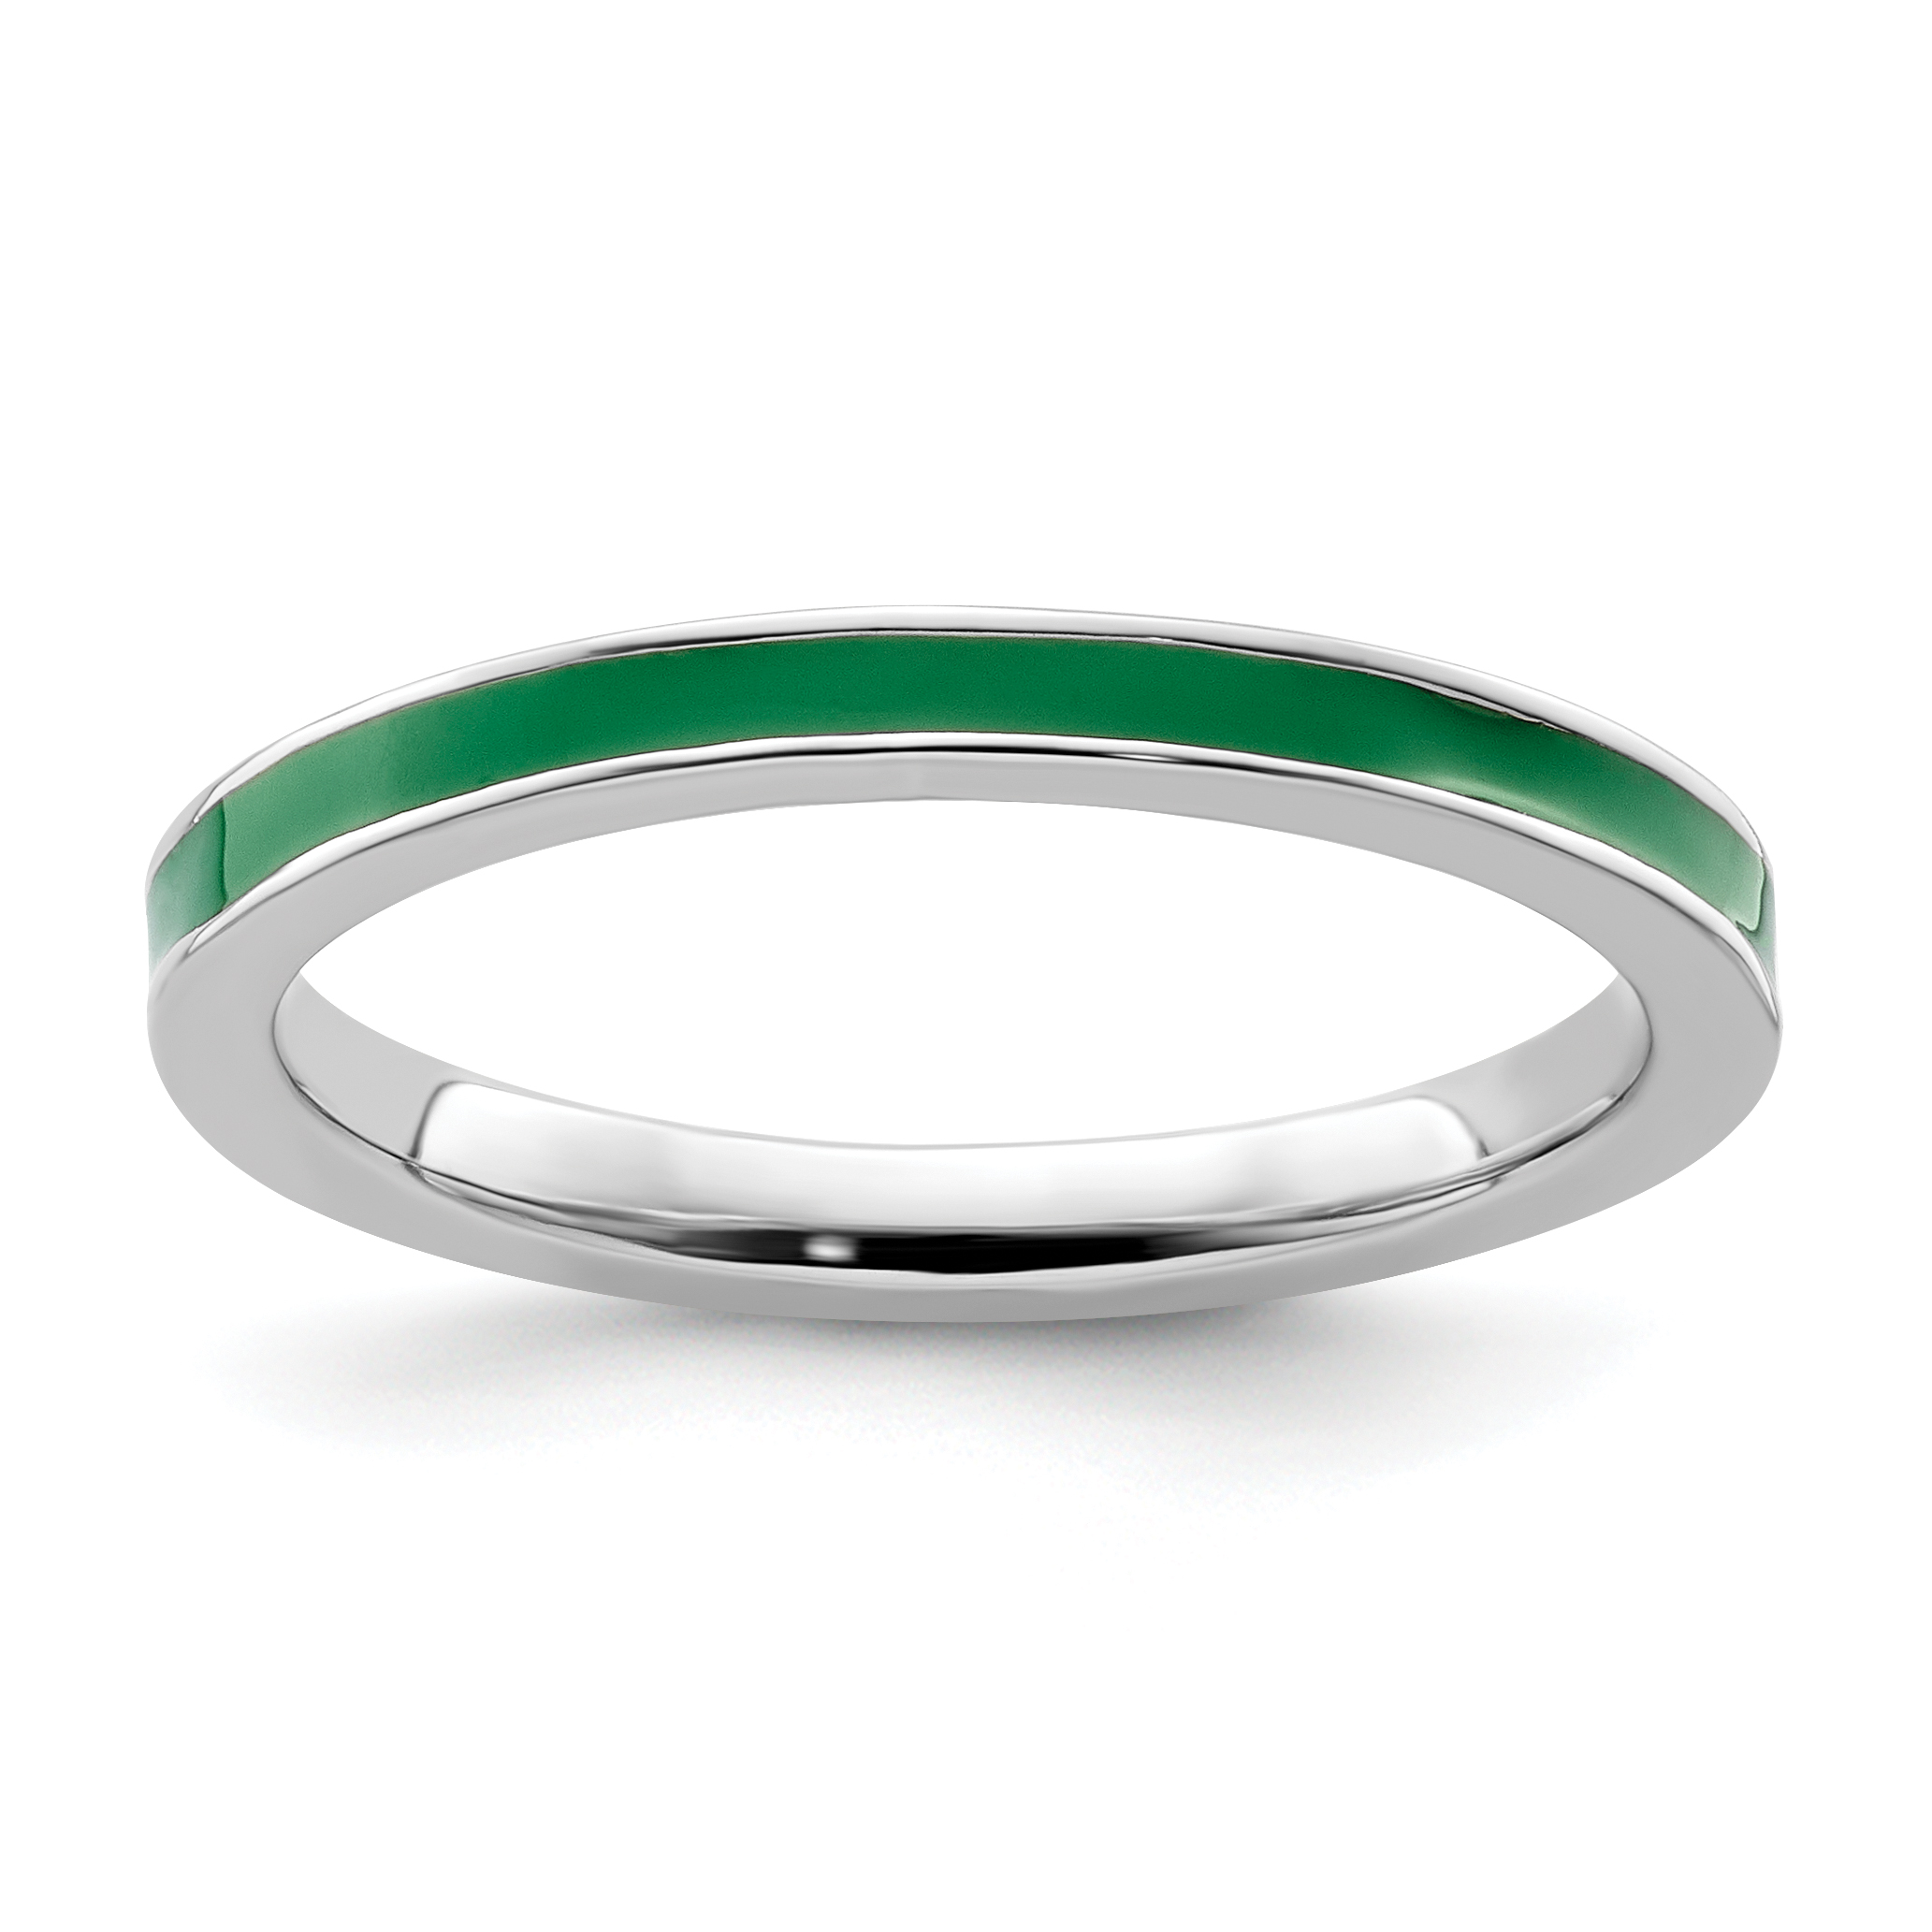 Stackable Expressions Sterling Silver Stackable Expressions Green Enameled 2.25mm Ring